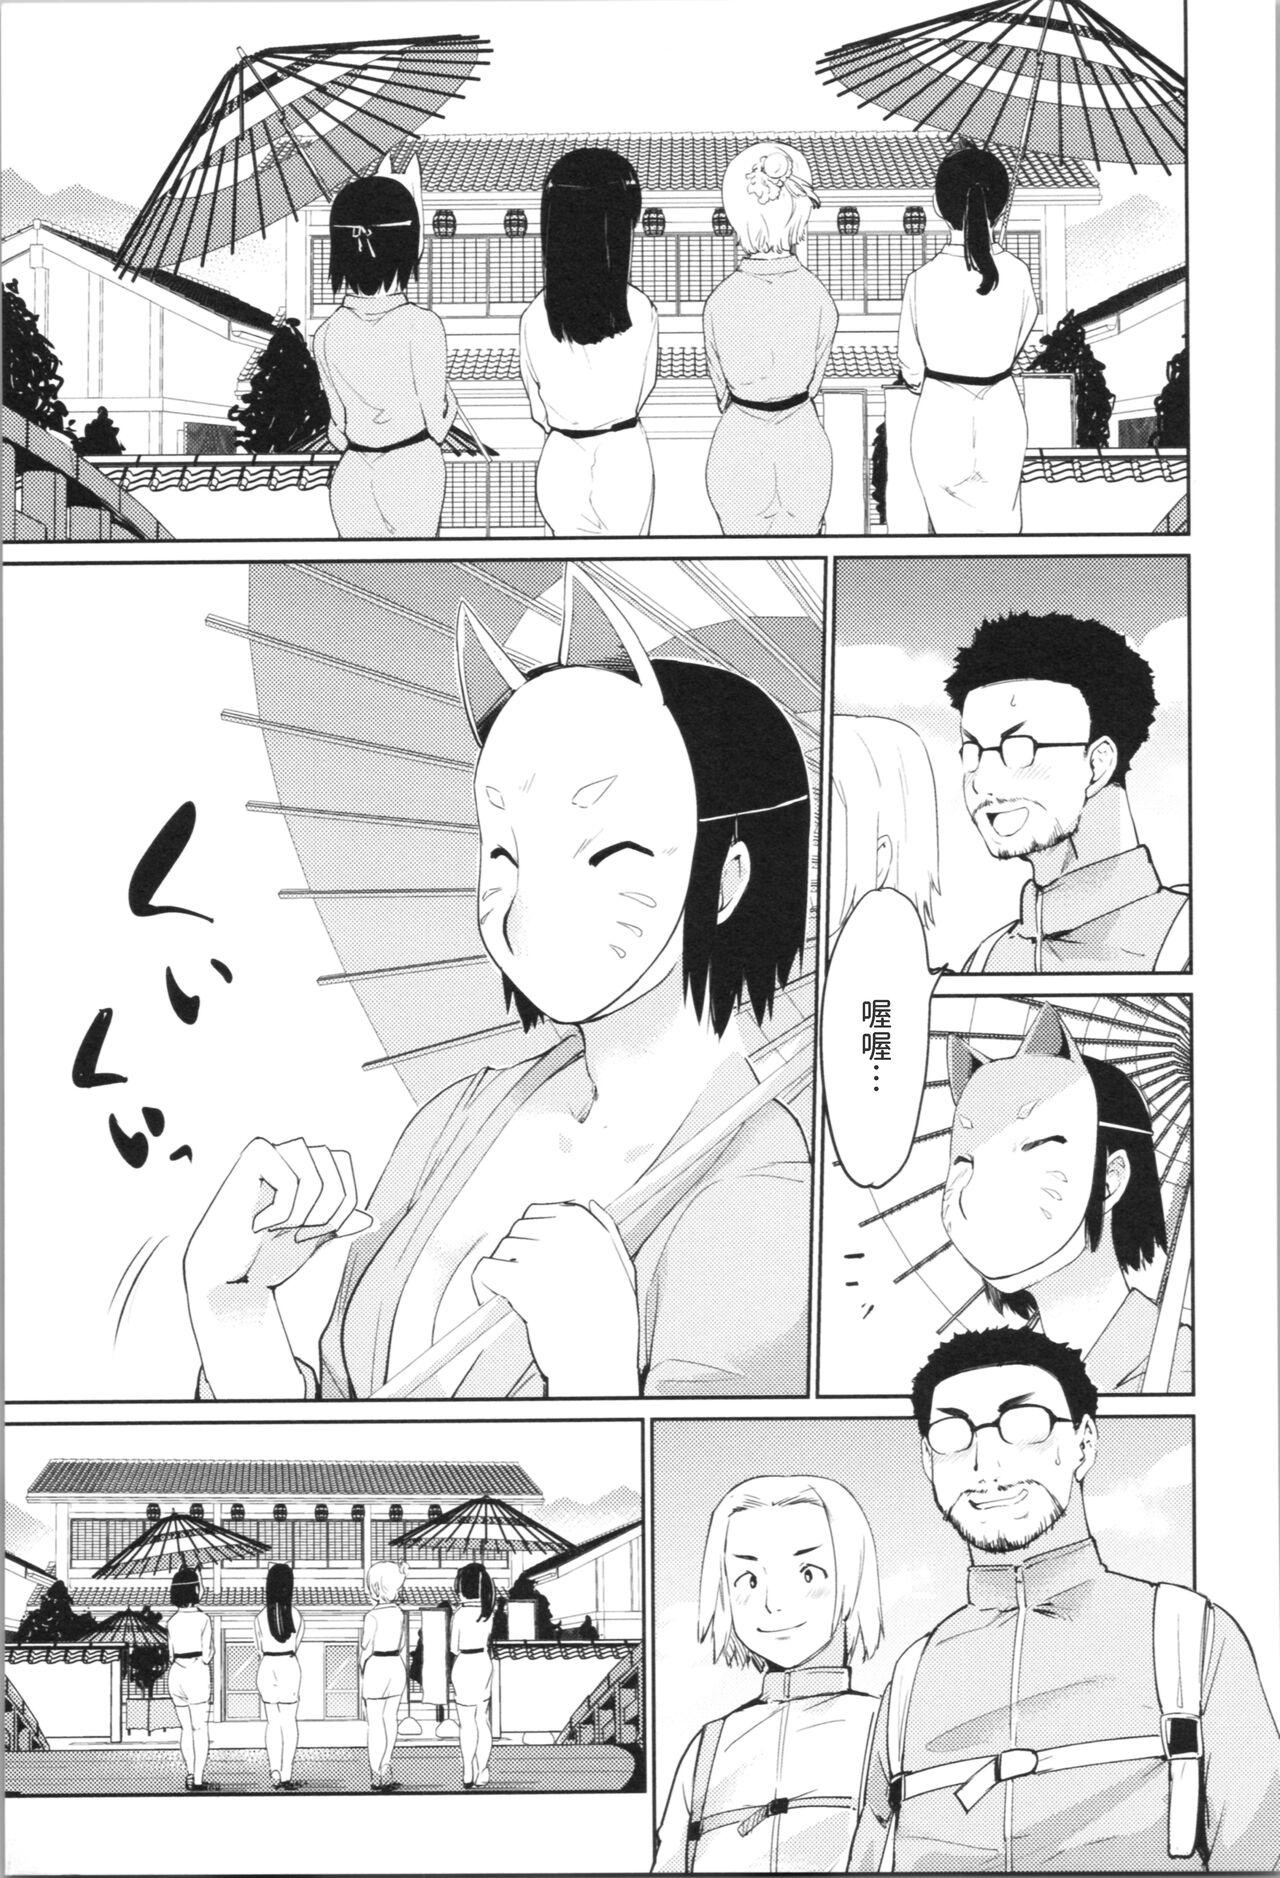 Old Vs Young [藤原俊一] ピンク★狐☆こんぱにおん (感バン娘) 中文翻譯 Turkish - Page 3